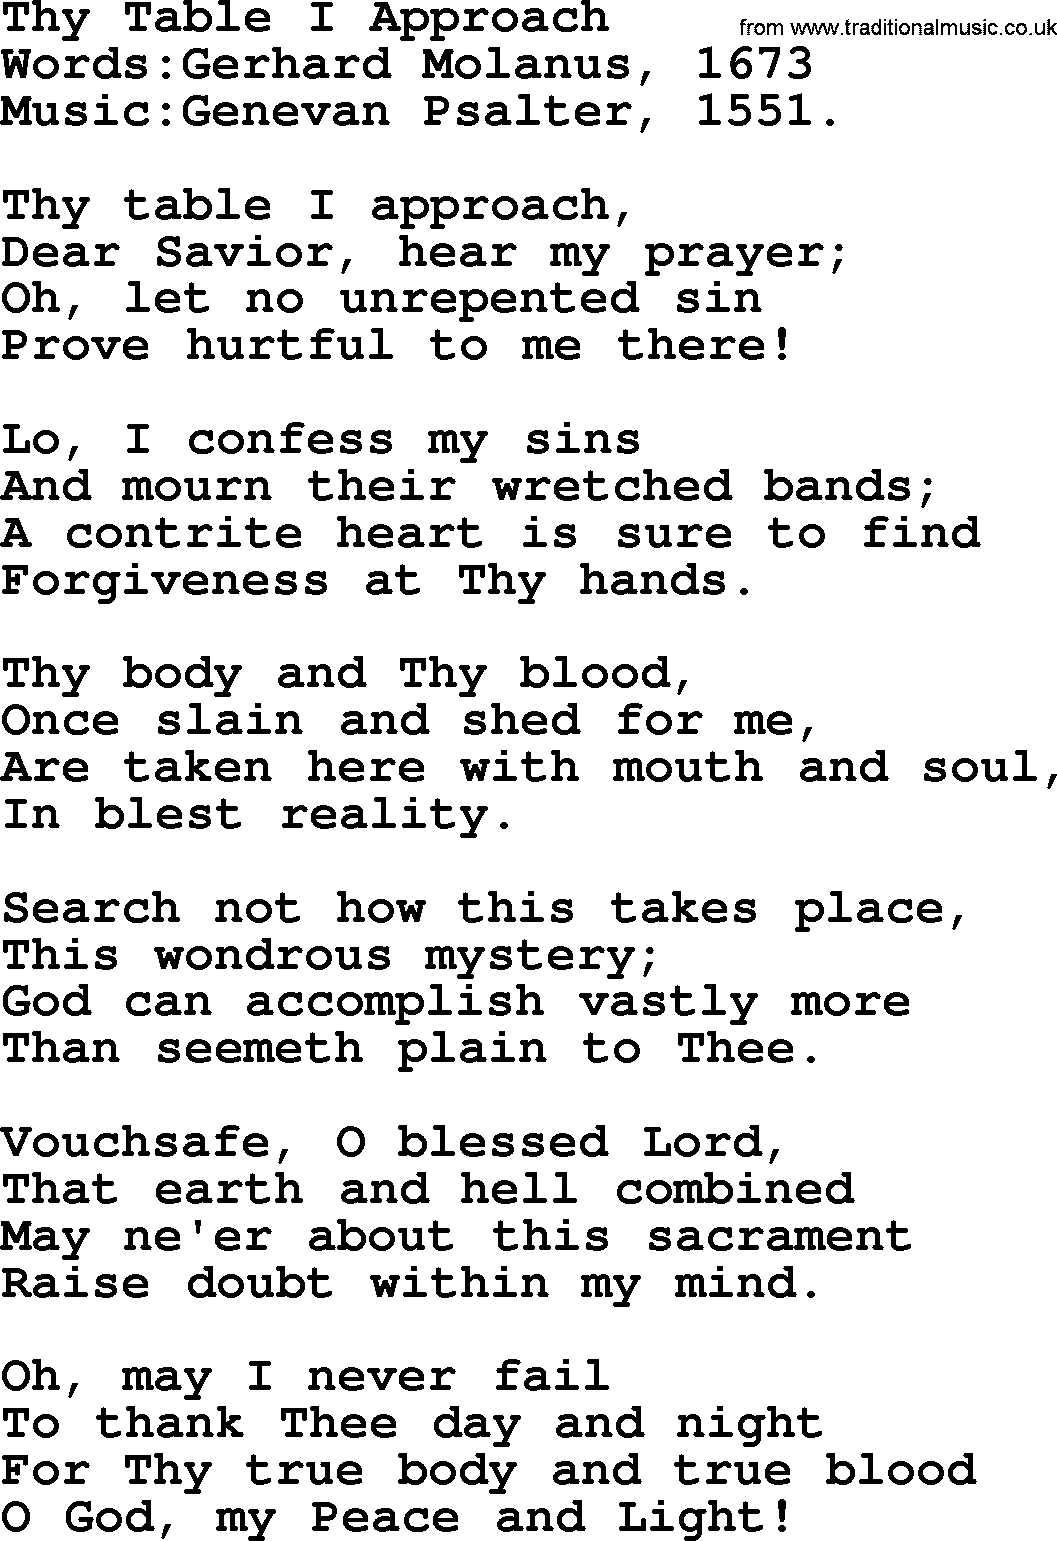 Christian hymns and song lyrics for Communion(The Eucharist): Thy Table I Approach, lyrics with PDF